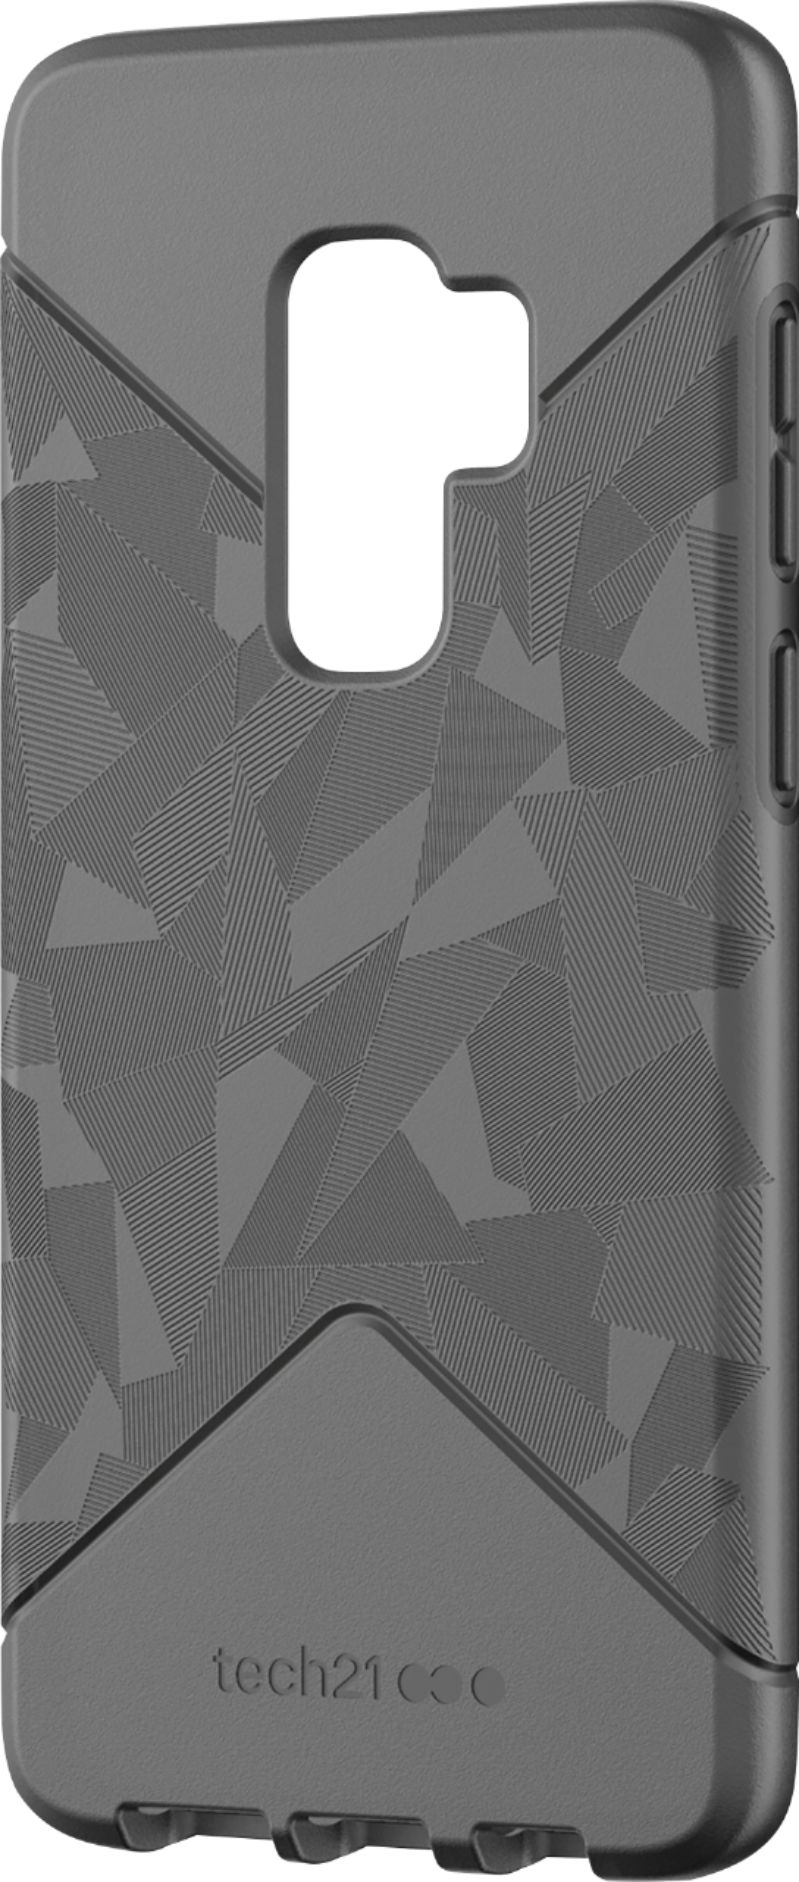 Sinis Schandalig Absorberend Best Buy: Tech21 Evo Tactical Case for Samsung Galaxy S9+ Black 50461BBR